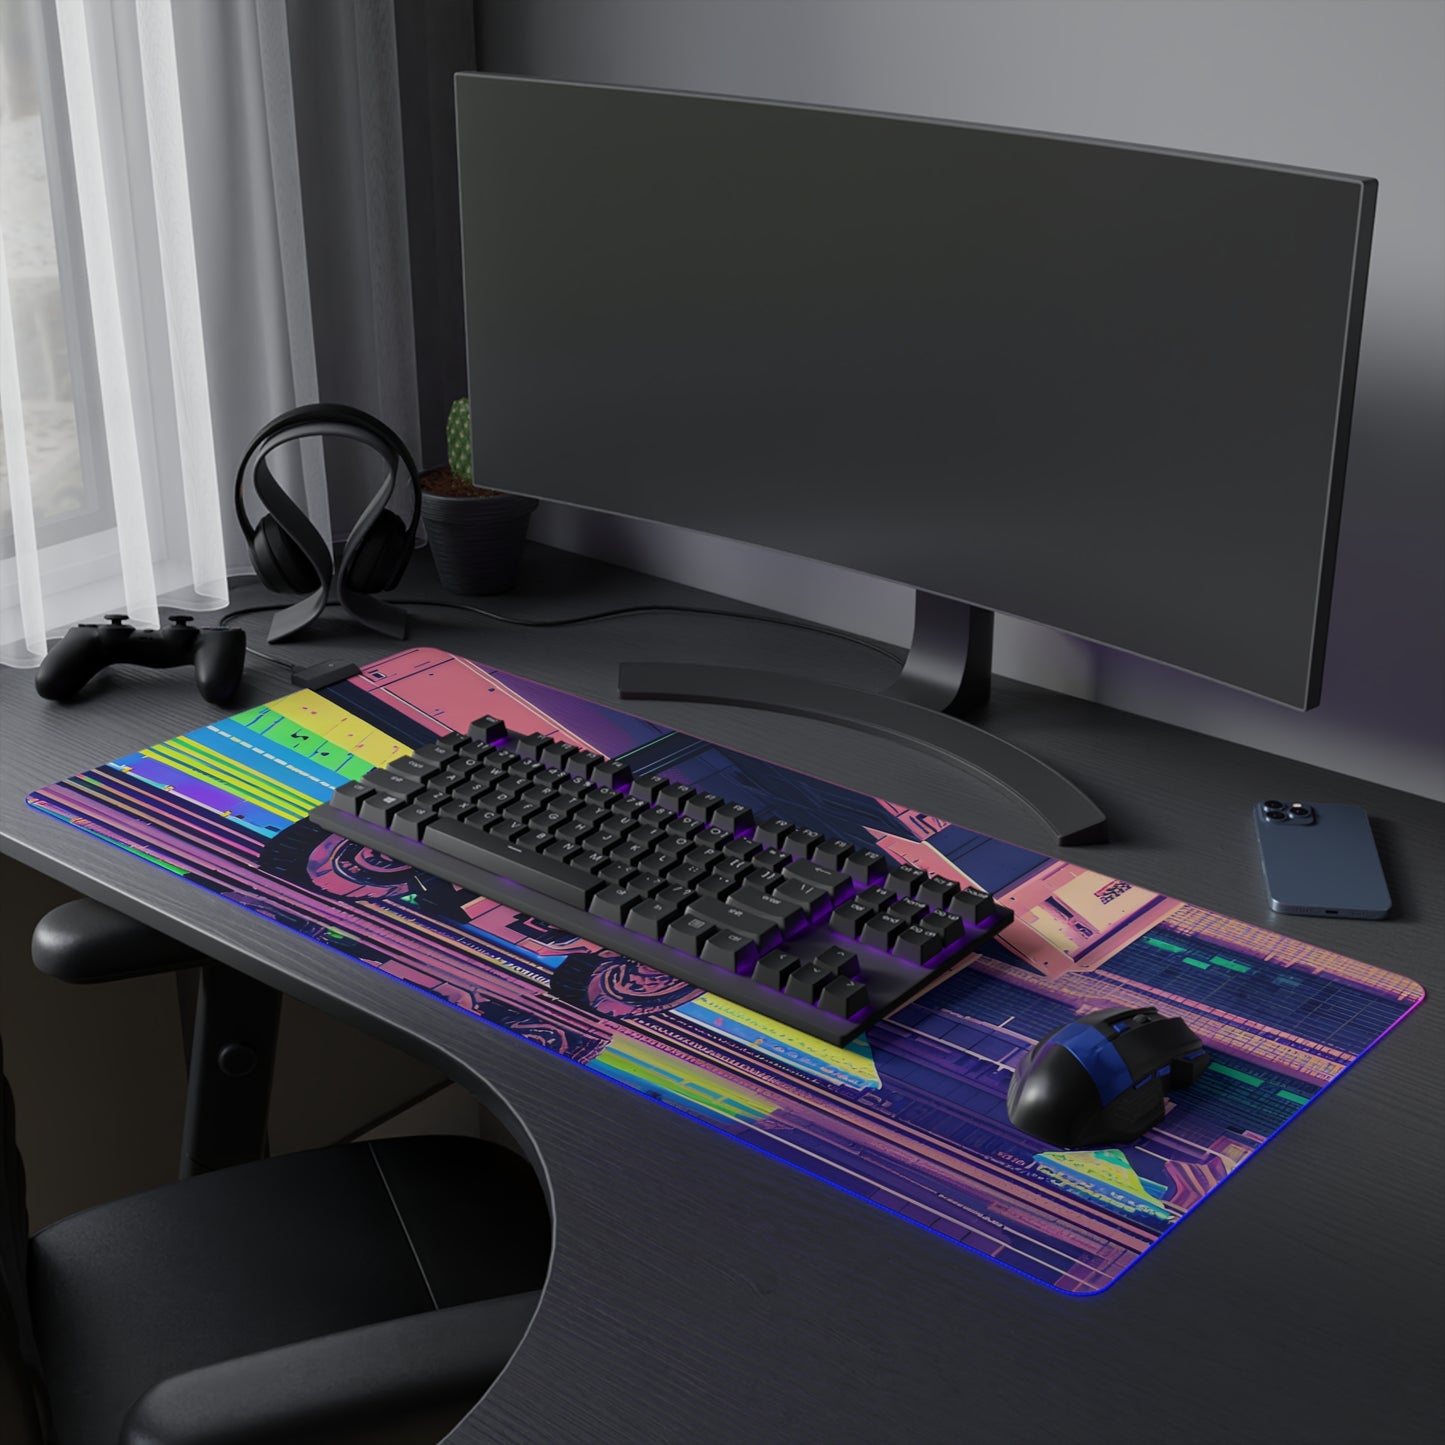 Pixel motorcycle LED Gaming Mouse Pad